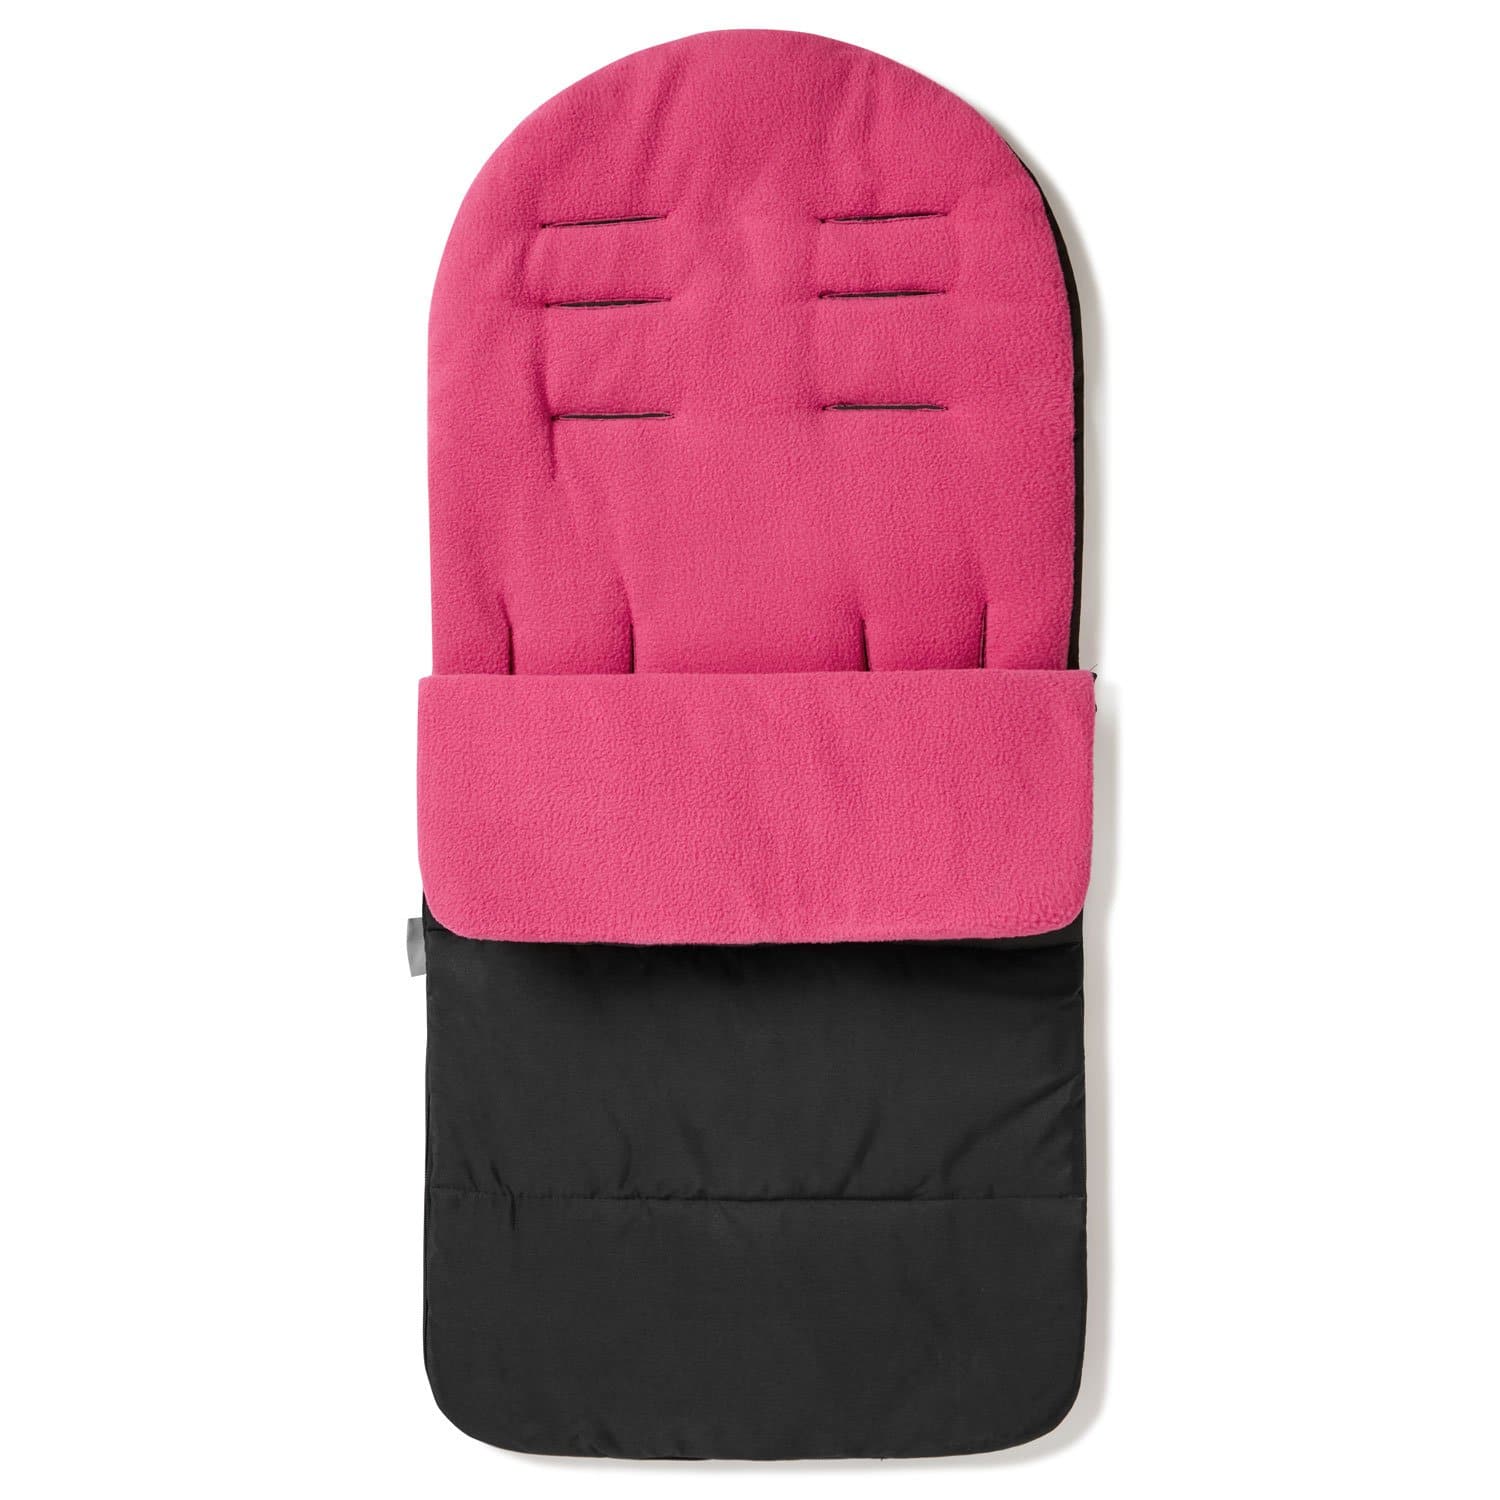 Premium Footmuff / Cosy Toes Compatible with Baby Jogger - For Your Little One